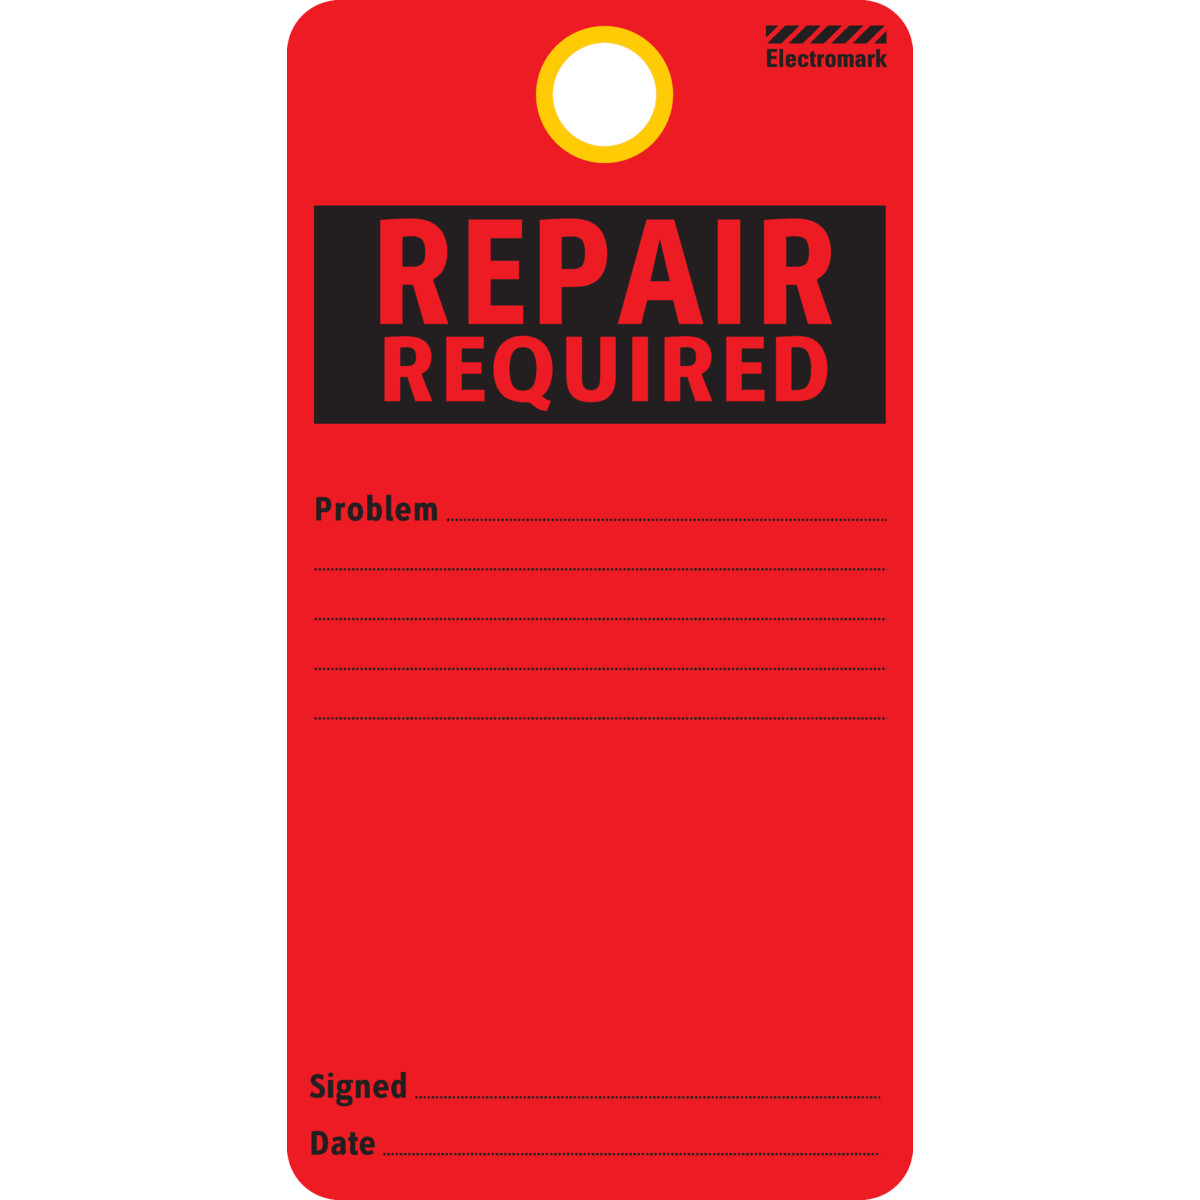 Repair Required Tag